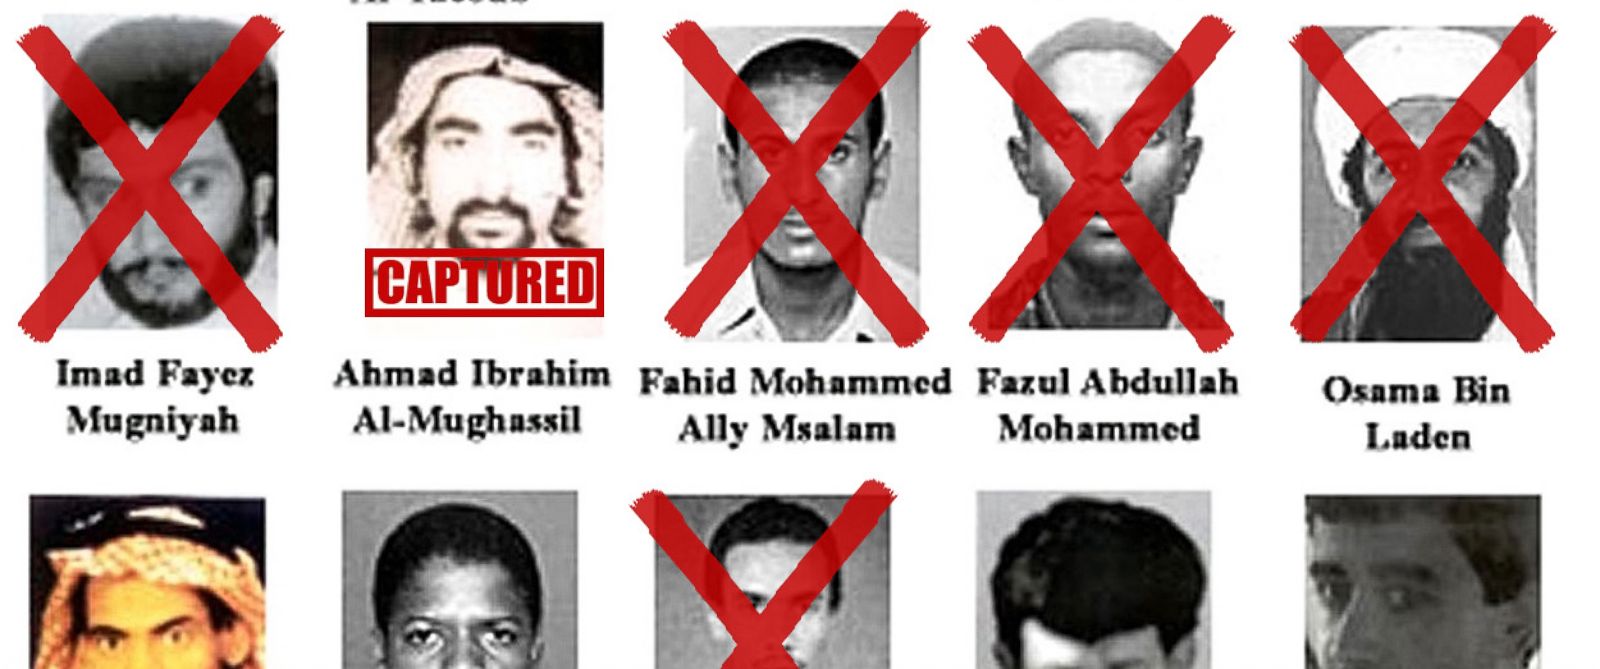 FBI's most wanted terrorists 15 years later The ones who got away